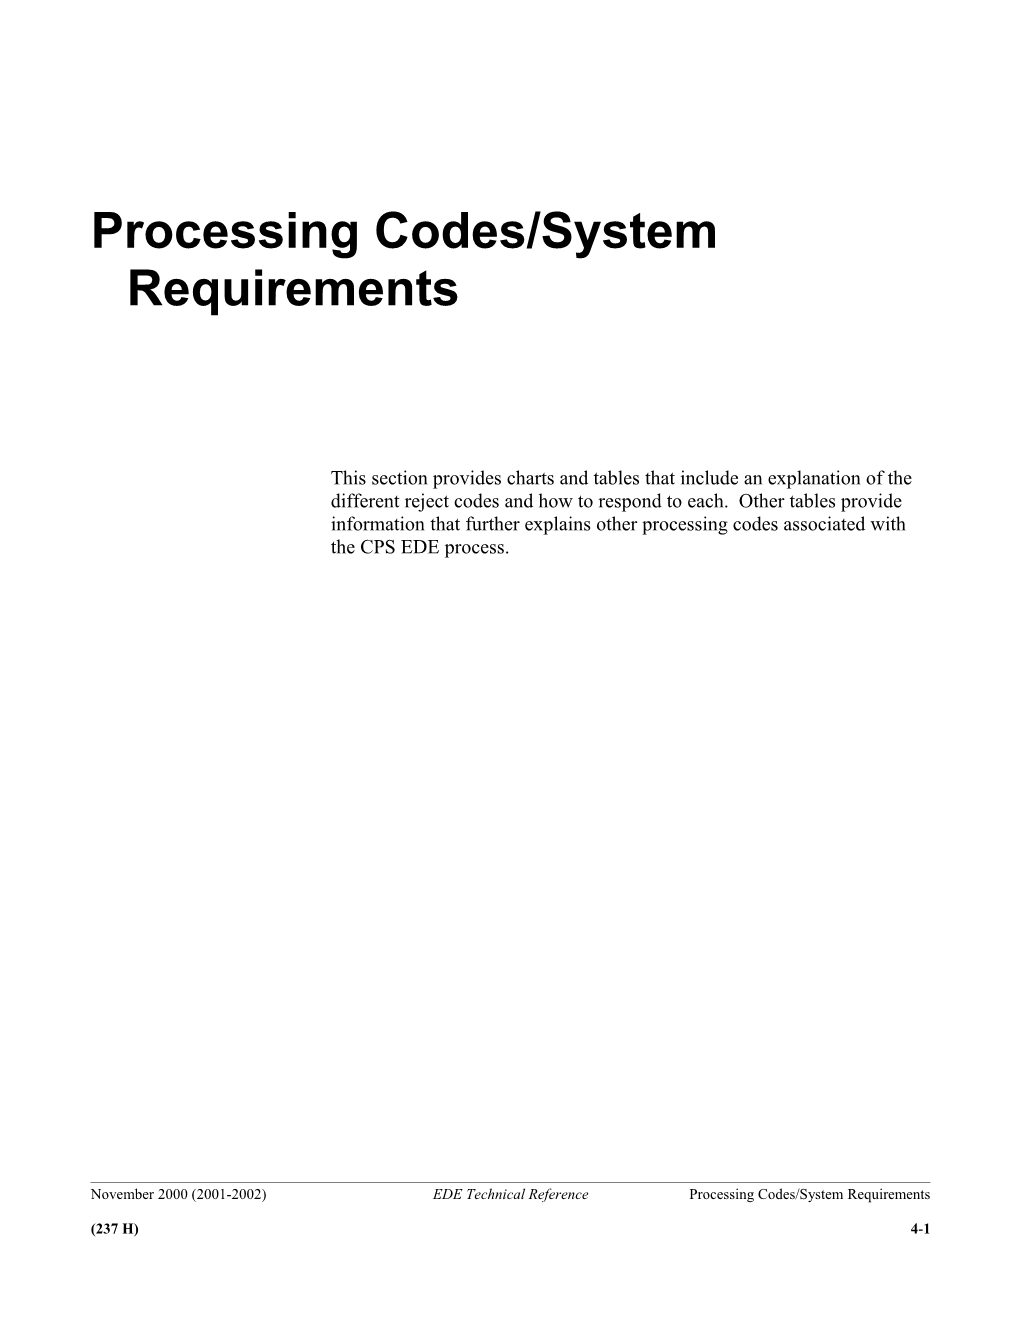 Processing Codes/System Requirements